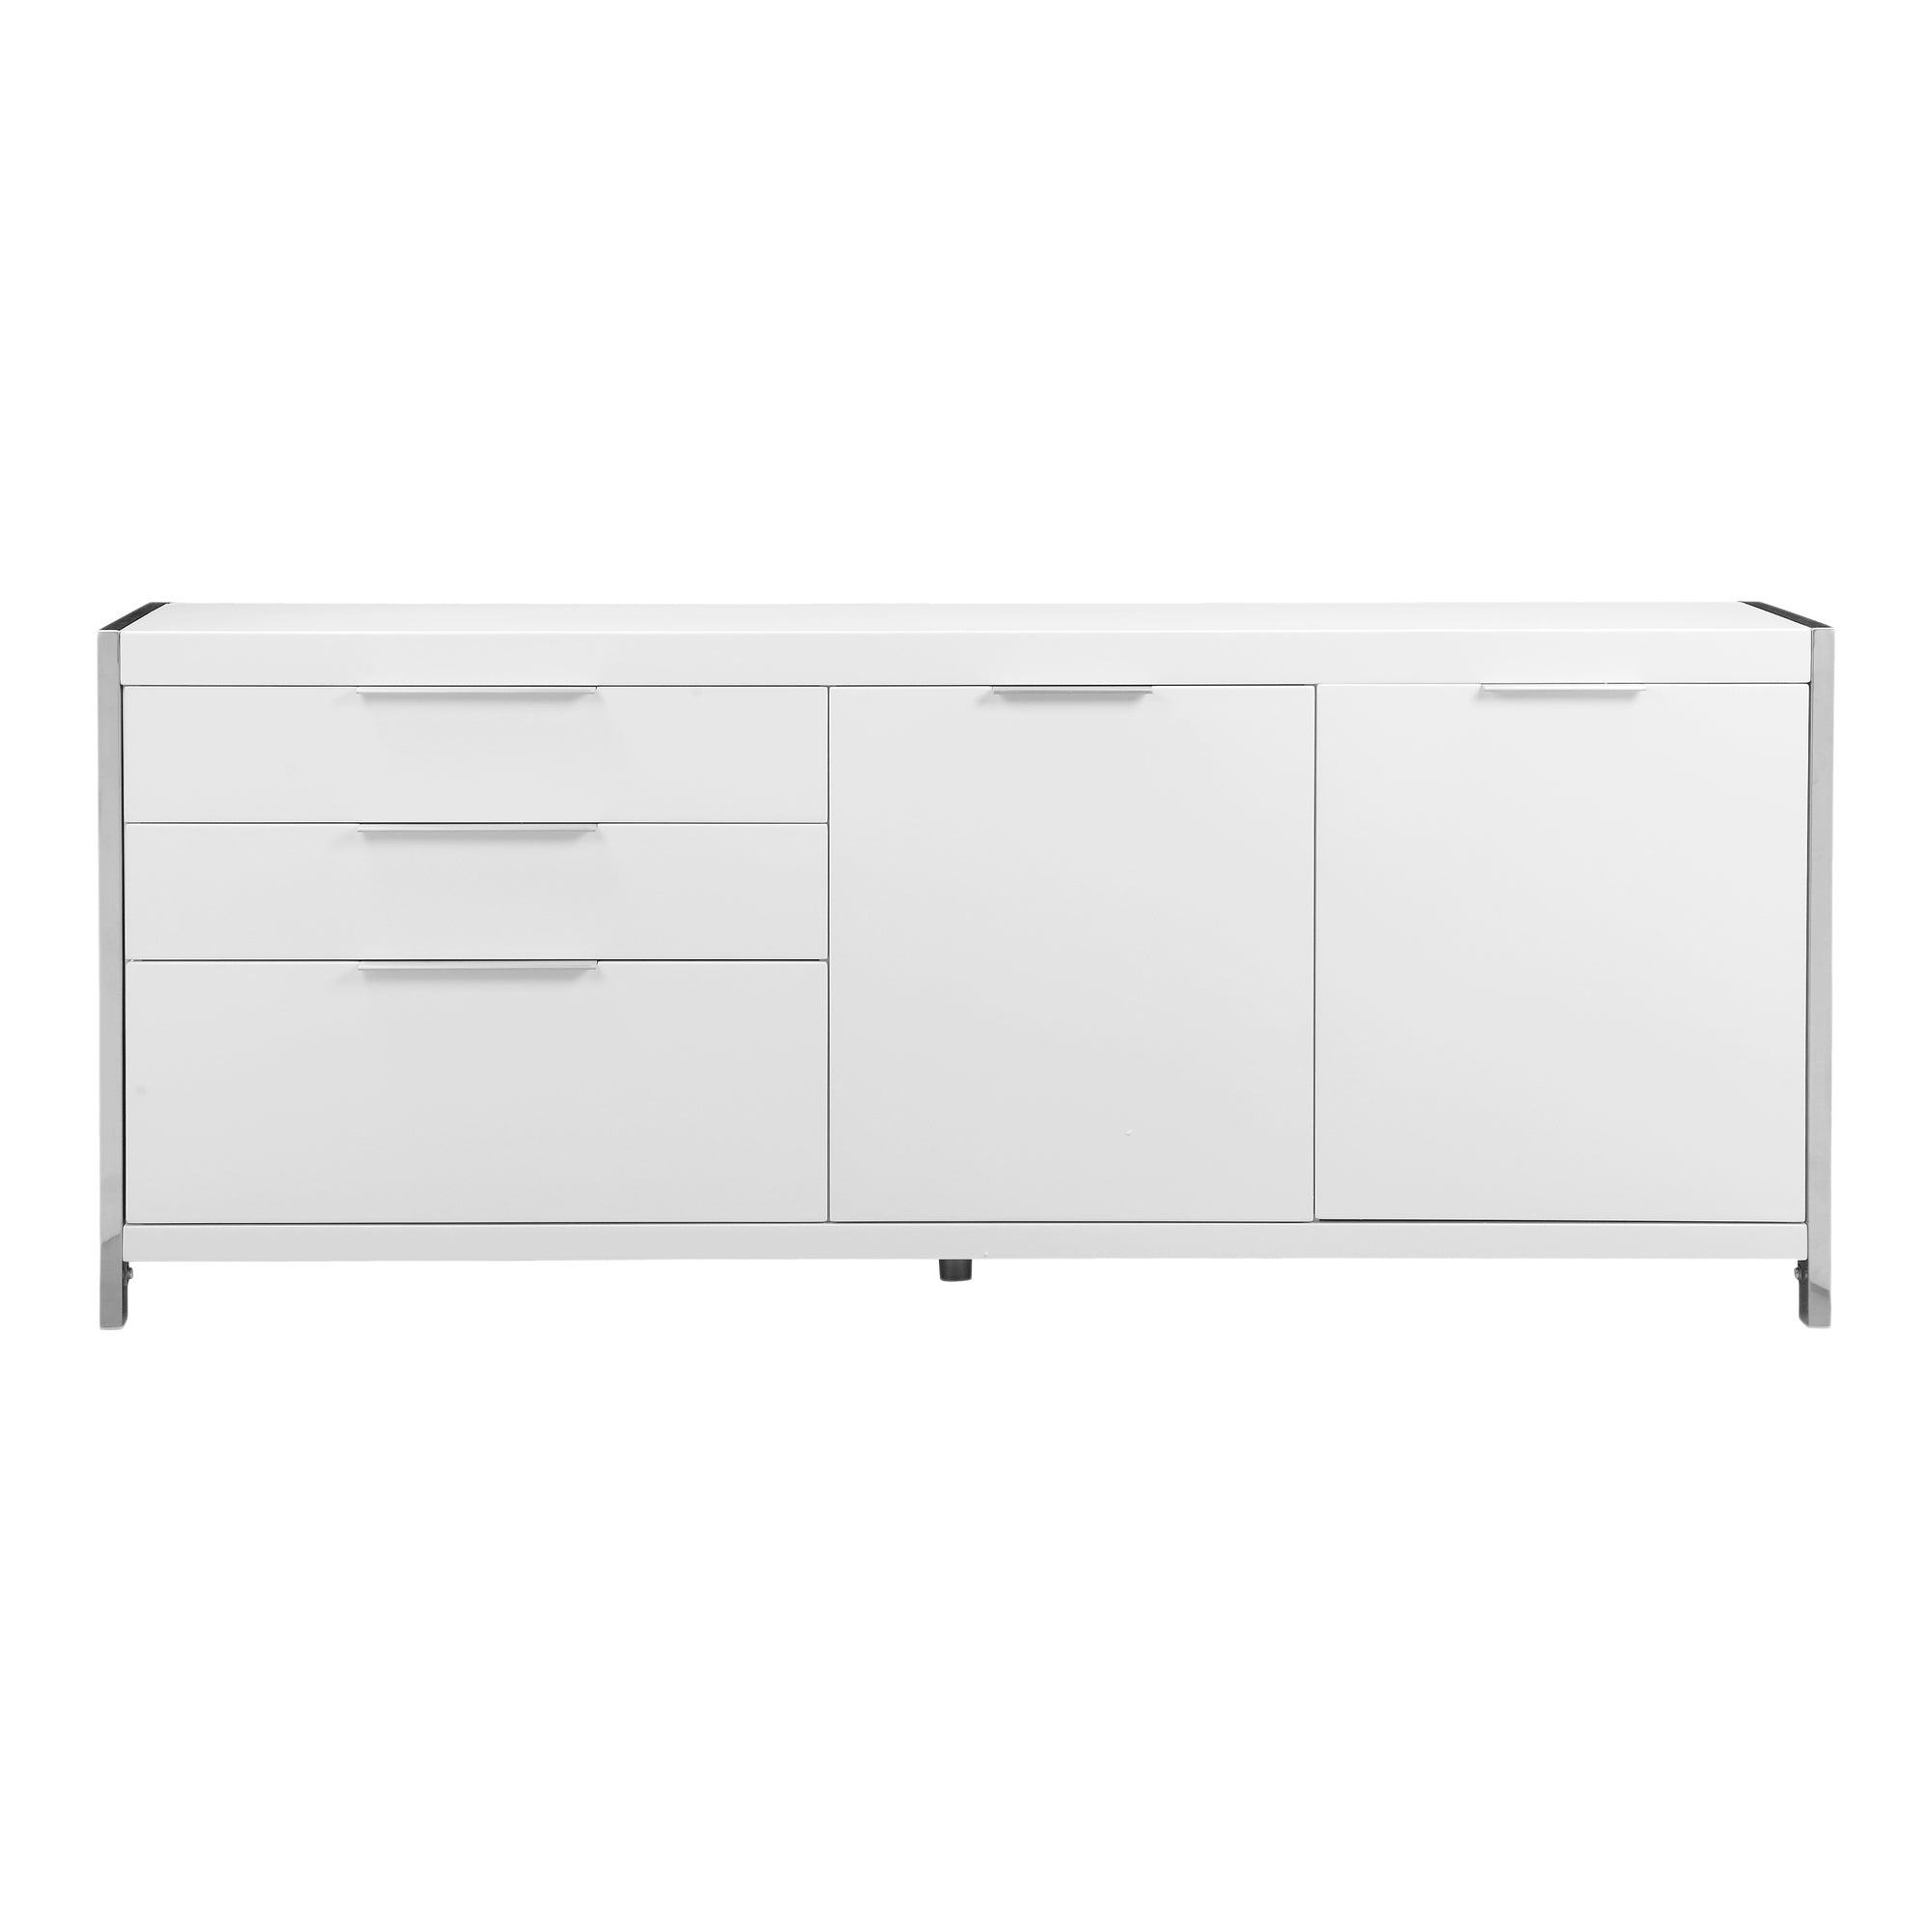 MOES-NEO SIDEBOARD-Sideboards-MODTEMPO